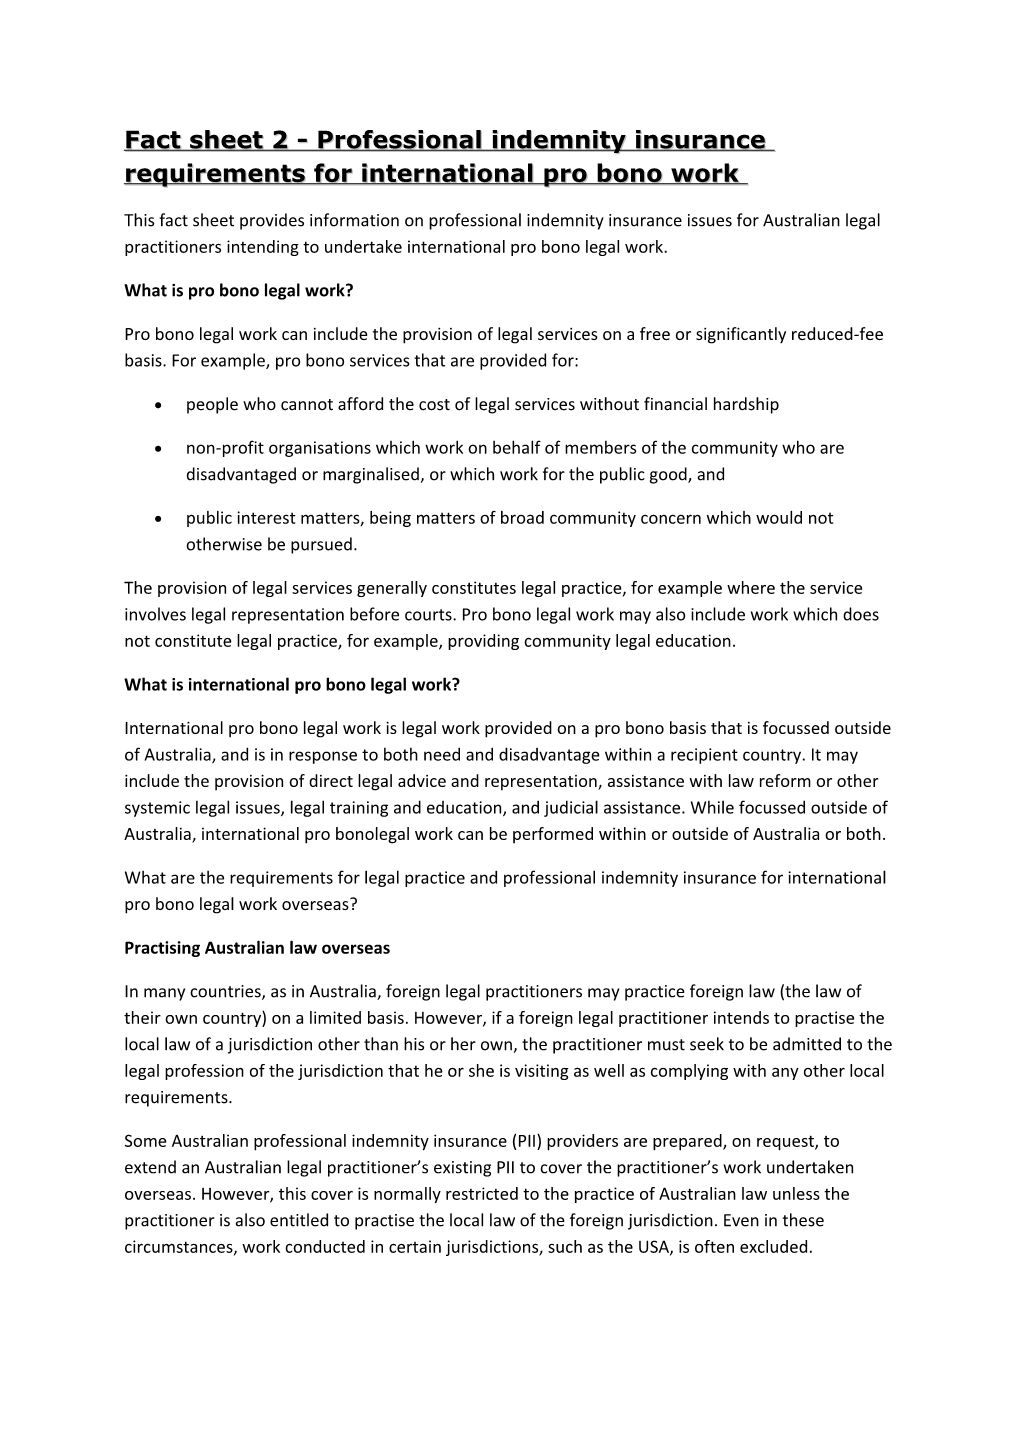 Fact Sheet 2 - Professional Indemnity Insurance Requirements for International Pro Bono Work